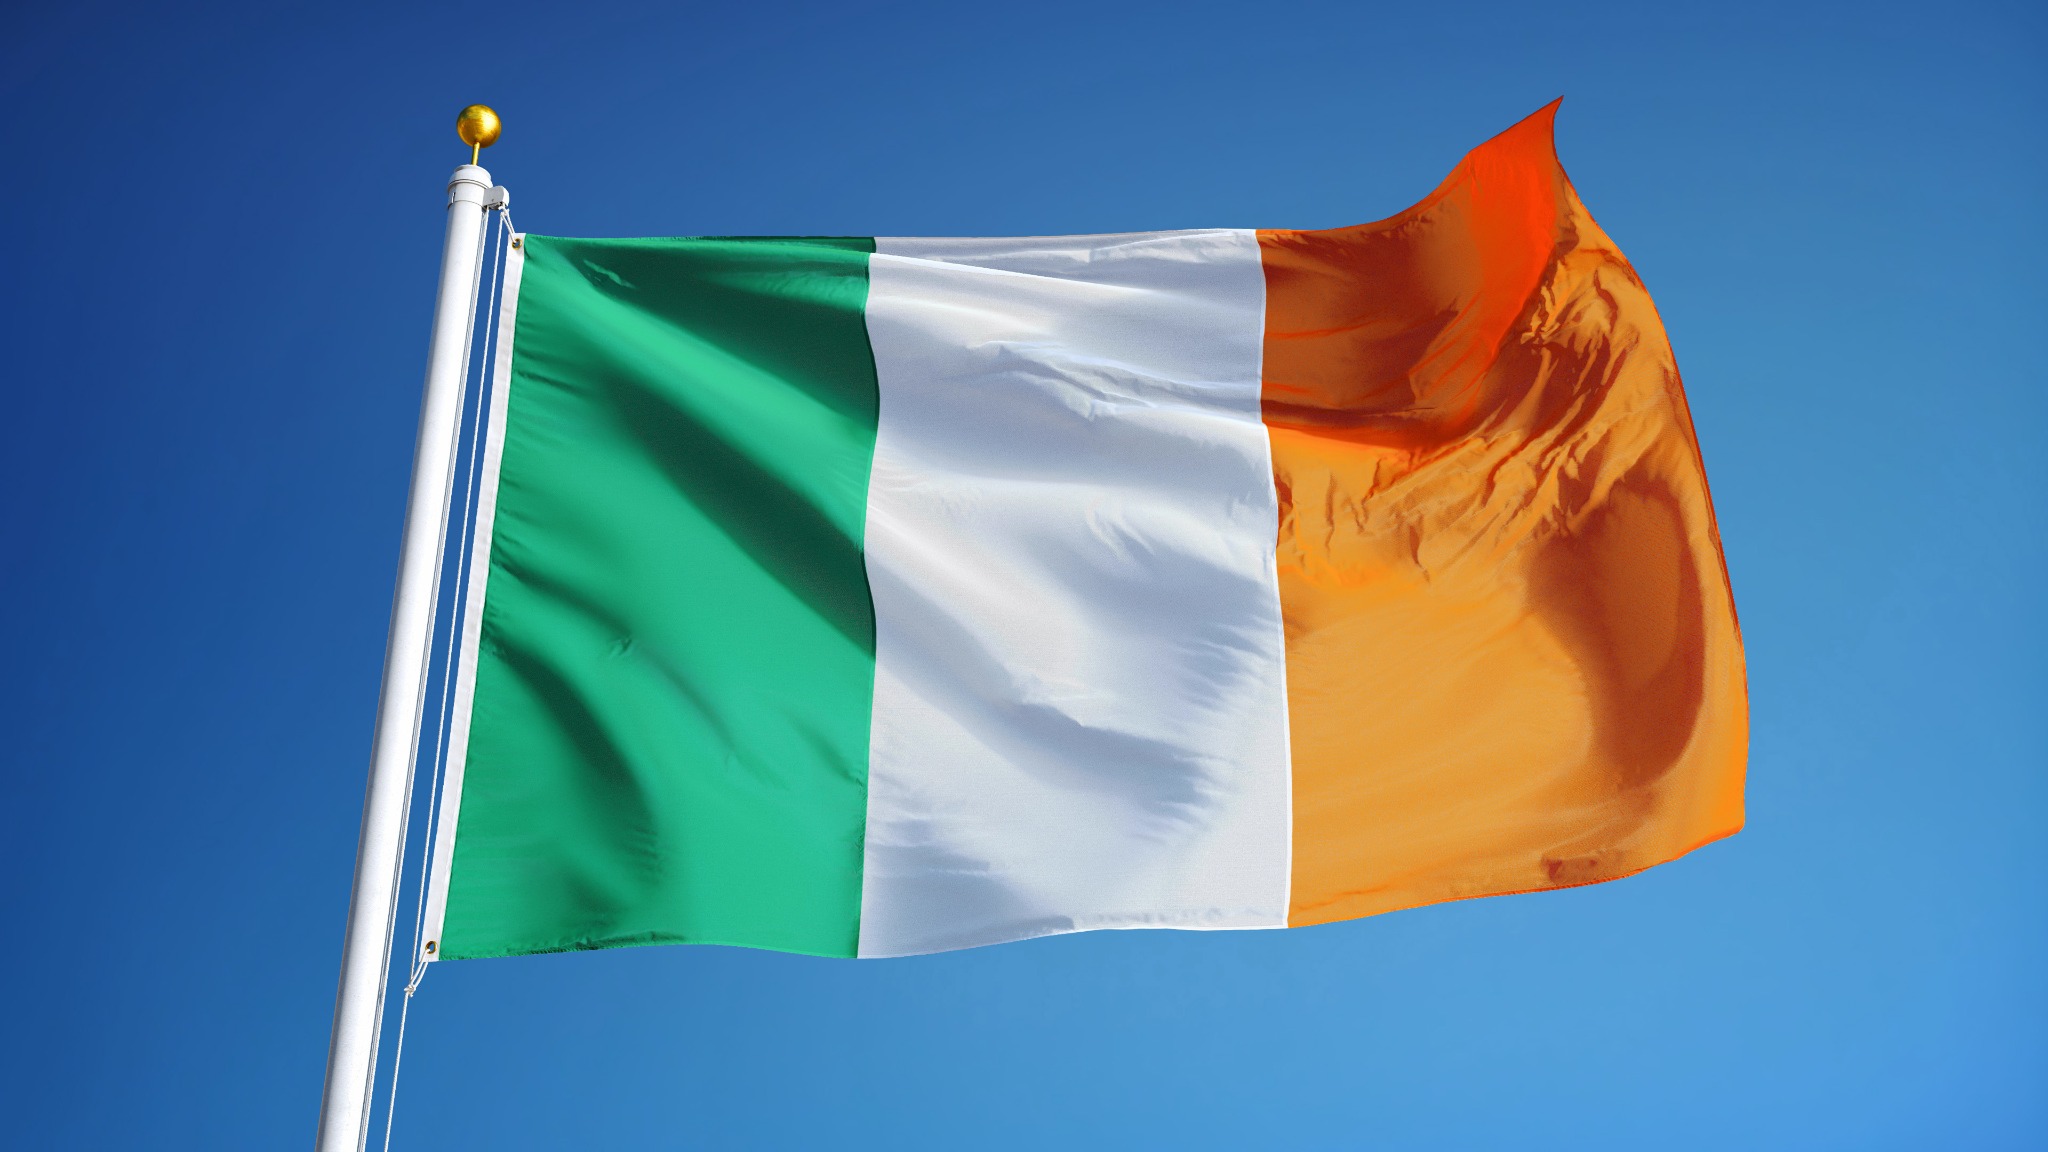 What Is The History Behind The Irish Flag?